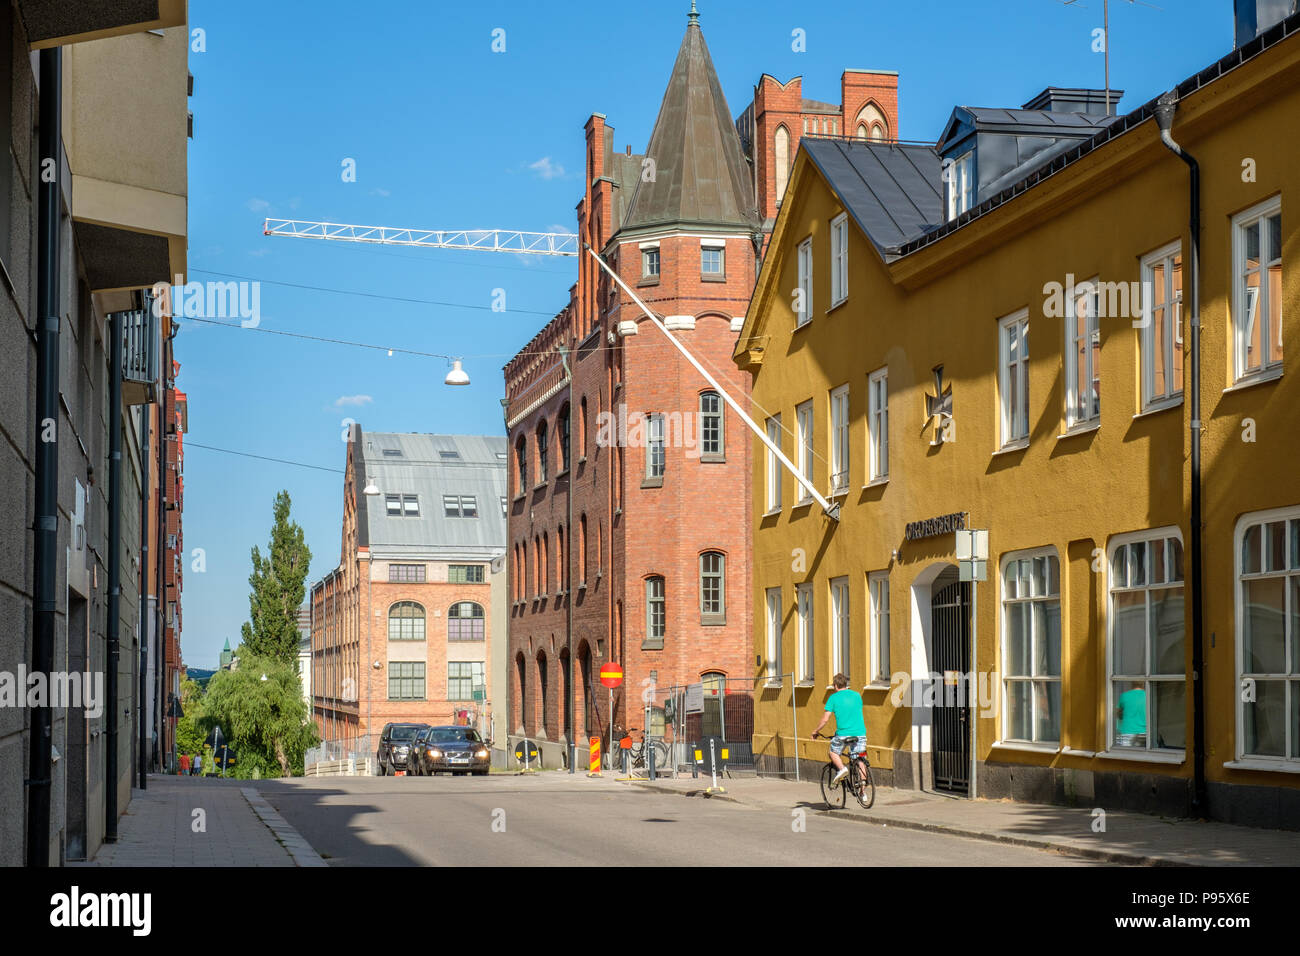 Fraternal order lodge W6 (yellow building) at Bredgatan in downtown Norrkoping. Norrkoping is a historic industrial town. Stock Photo